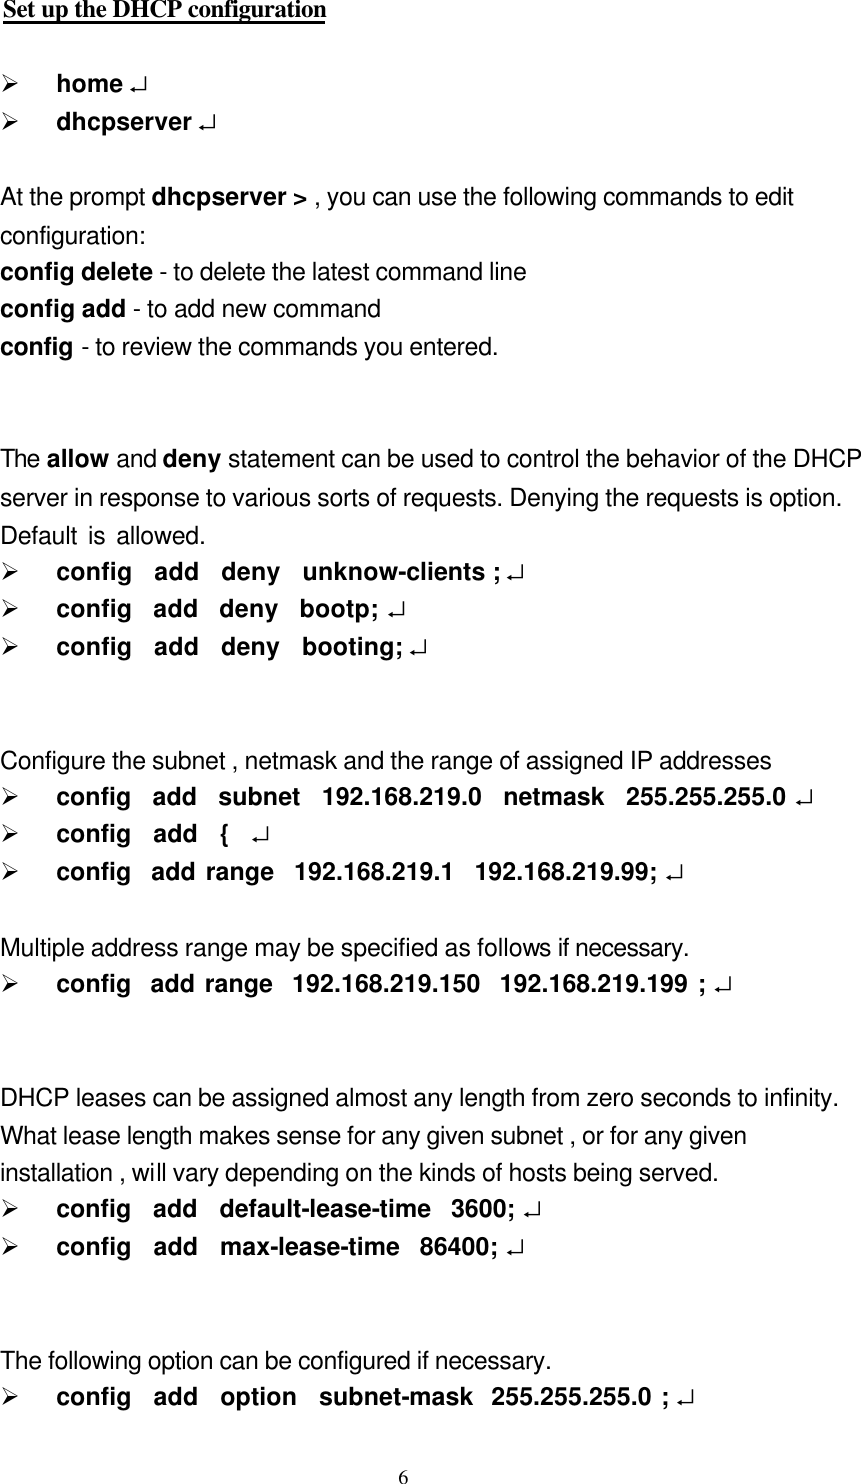  6Set up the DHCP configuration  Ø home ↵   Ø dhcpserver ↵    At the prompt dhcpserver &gt; , you can use the following commands to edit   configuration: config delete - to delete the latest command line config add - to add new command   config - to review the commands you entered.   The allow and deny statement can be used to control the behavior of the DHCP   server in response to various sorts of requests. Denying the requests is option.   Default is allowed.      Ø config  add  deny  unknow-clients ; ↵ Ø config  add  deny  bootp; ↵   Ø config  add  deny  booting; ↵       Configure the subnet , netmask and the range of assigned IP addresses Ø config  add  subnet  192.168.219.0  netmask  255.255.255.0 ↵   Ø config  add  {  ↵   Ø config  add range  192.168.219.1  192.168.219.99; ↵    Multiple address range may be specified as follows if necessary. Ø config  add range  192.168.219.150  192.168.219.199 ; ↵     DHCP leases can be assigned almost any length from zero seconds to infinity.   What lease length makes sense for any given subnet , or for any given   installation , will vary depending on the kinds of hosts being served. Ø config  add  default-lease-time  3600; ↵   Ø config  add  max-lease-time  86400; ↵     The following option can be configured if necessary. Ø config  add  option  subnet-mask  255.255.255.0 ; ↵   